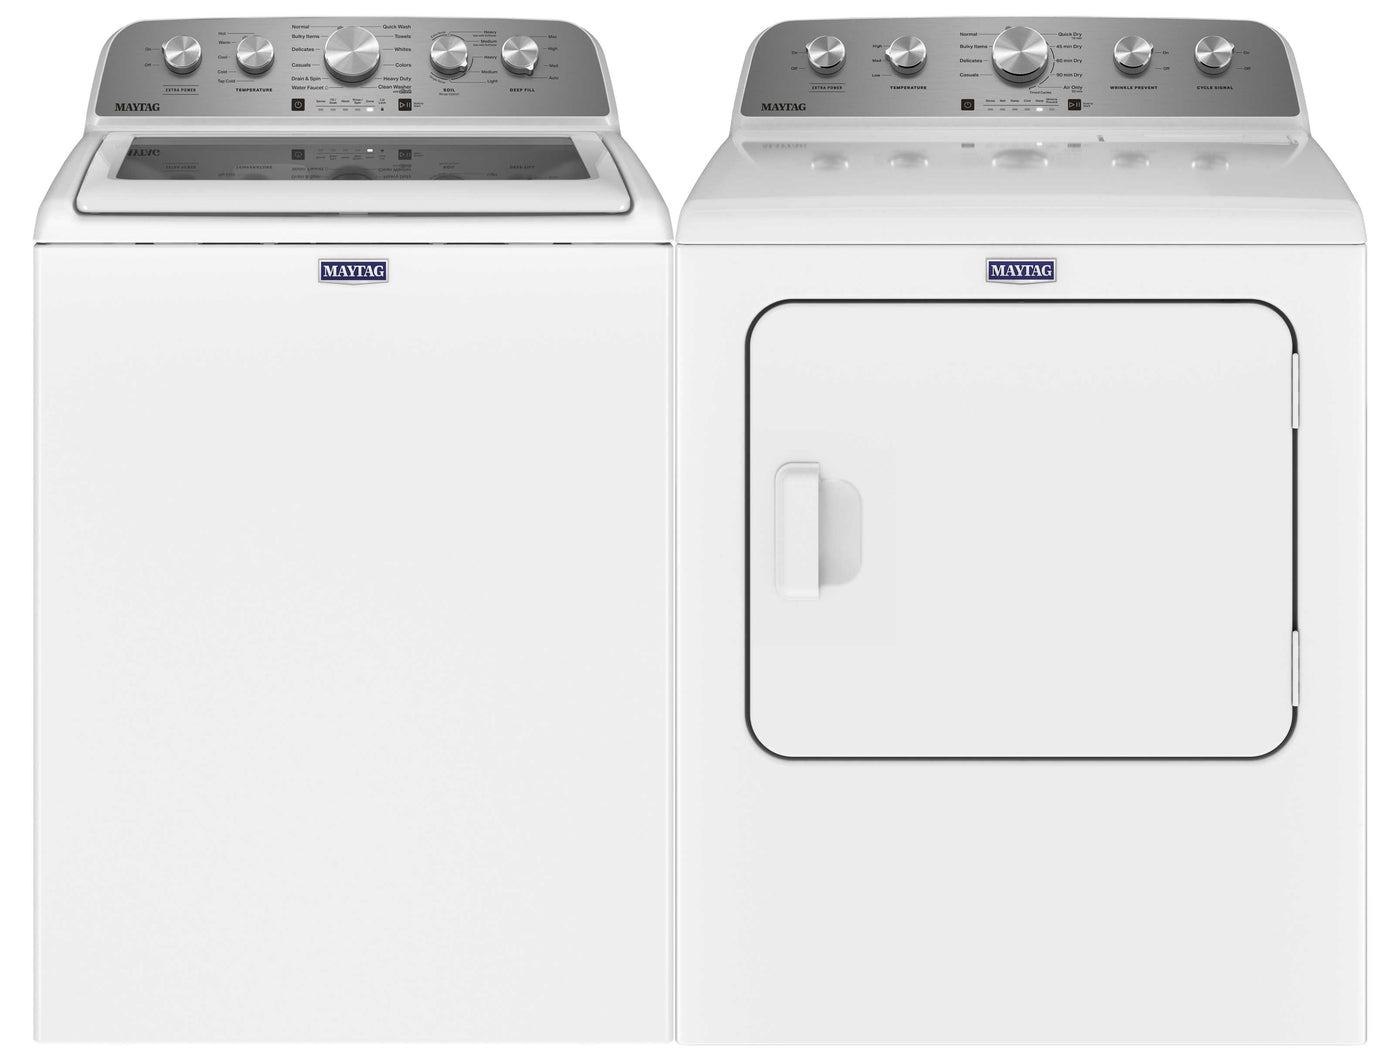 Maytag White Top-Load Washer (5.5 cu. ft.) & Electric Dryer (7.0 cu. ft.) - MVW5430MW/YMED5030MW